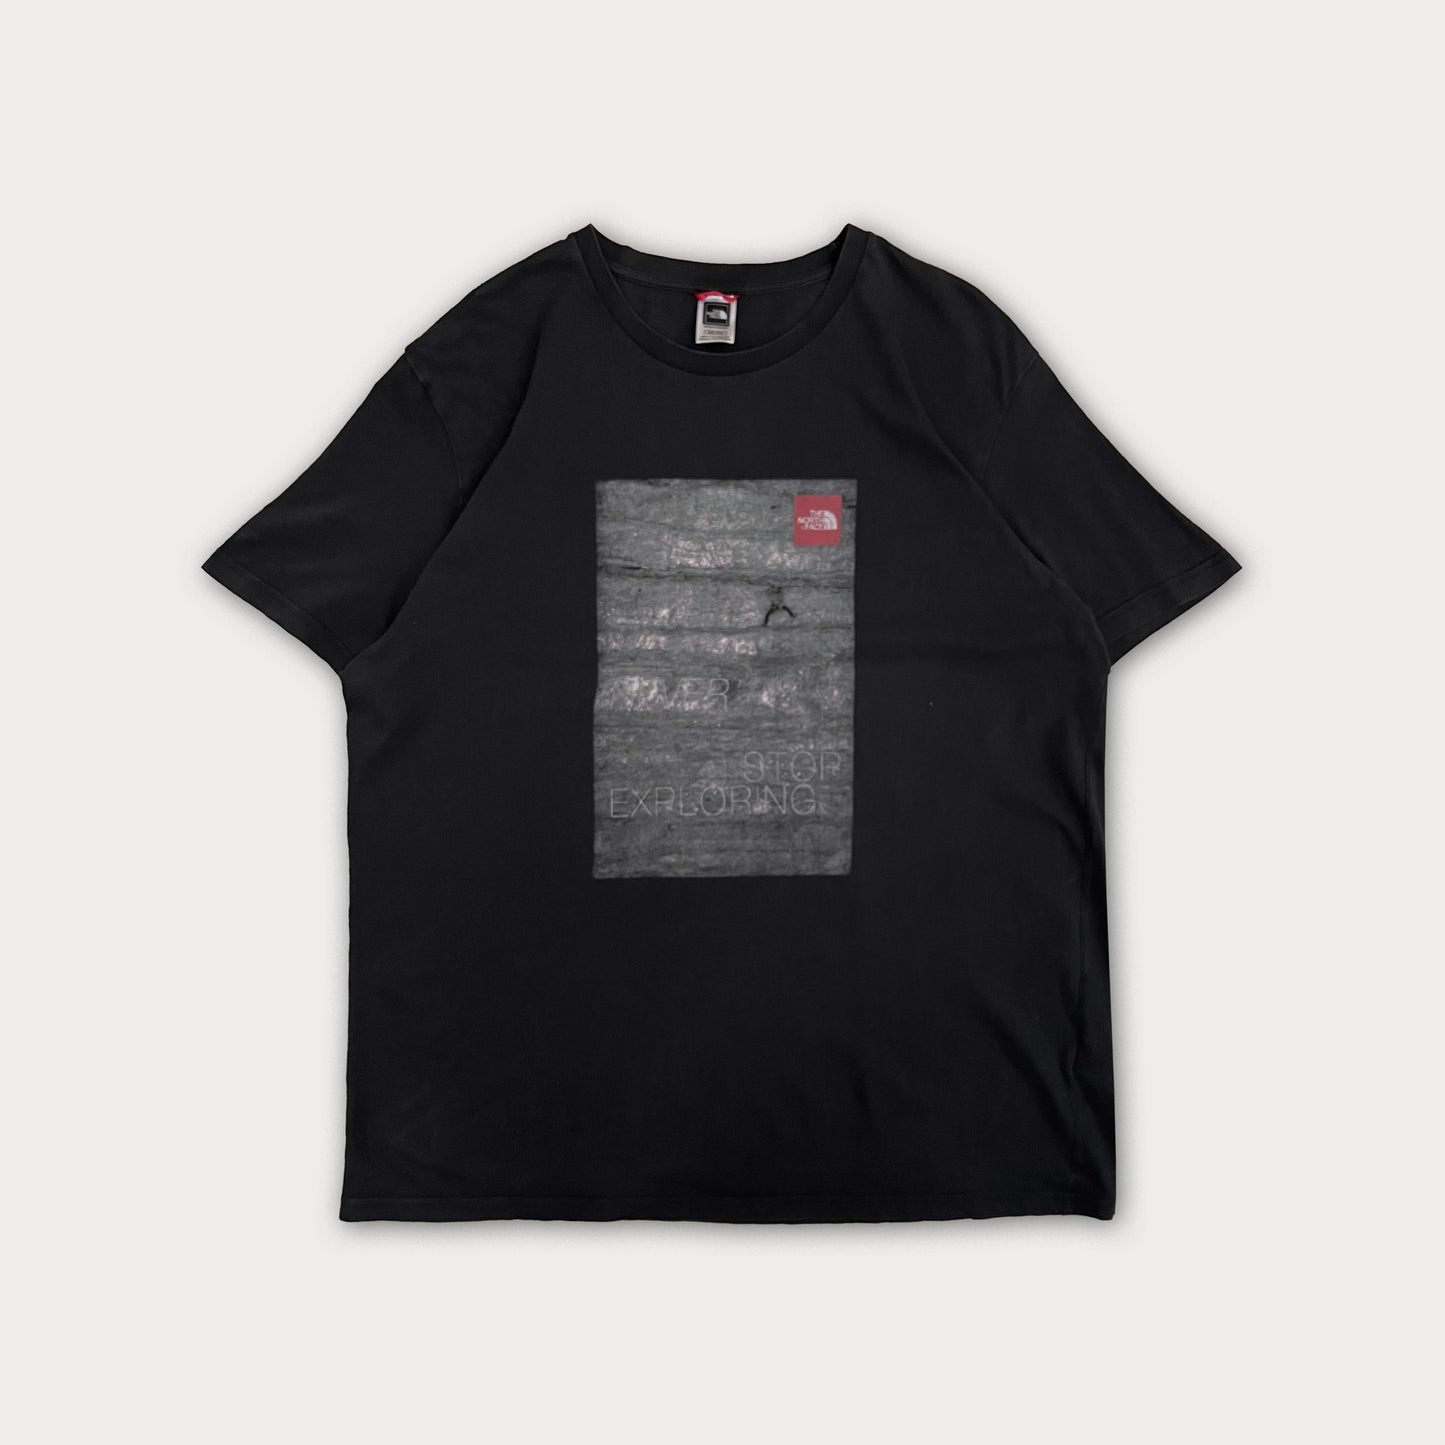 The North Face Tee